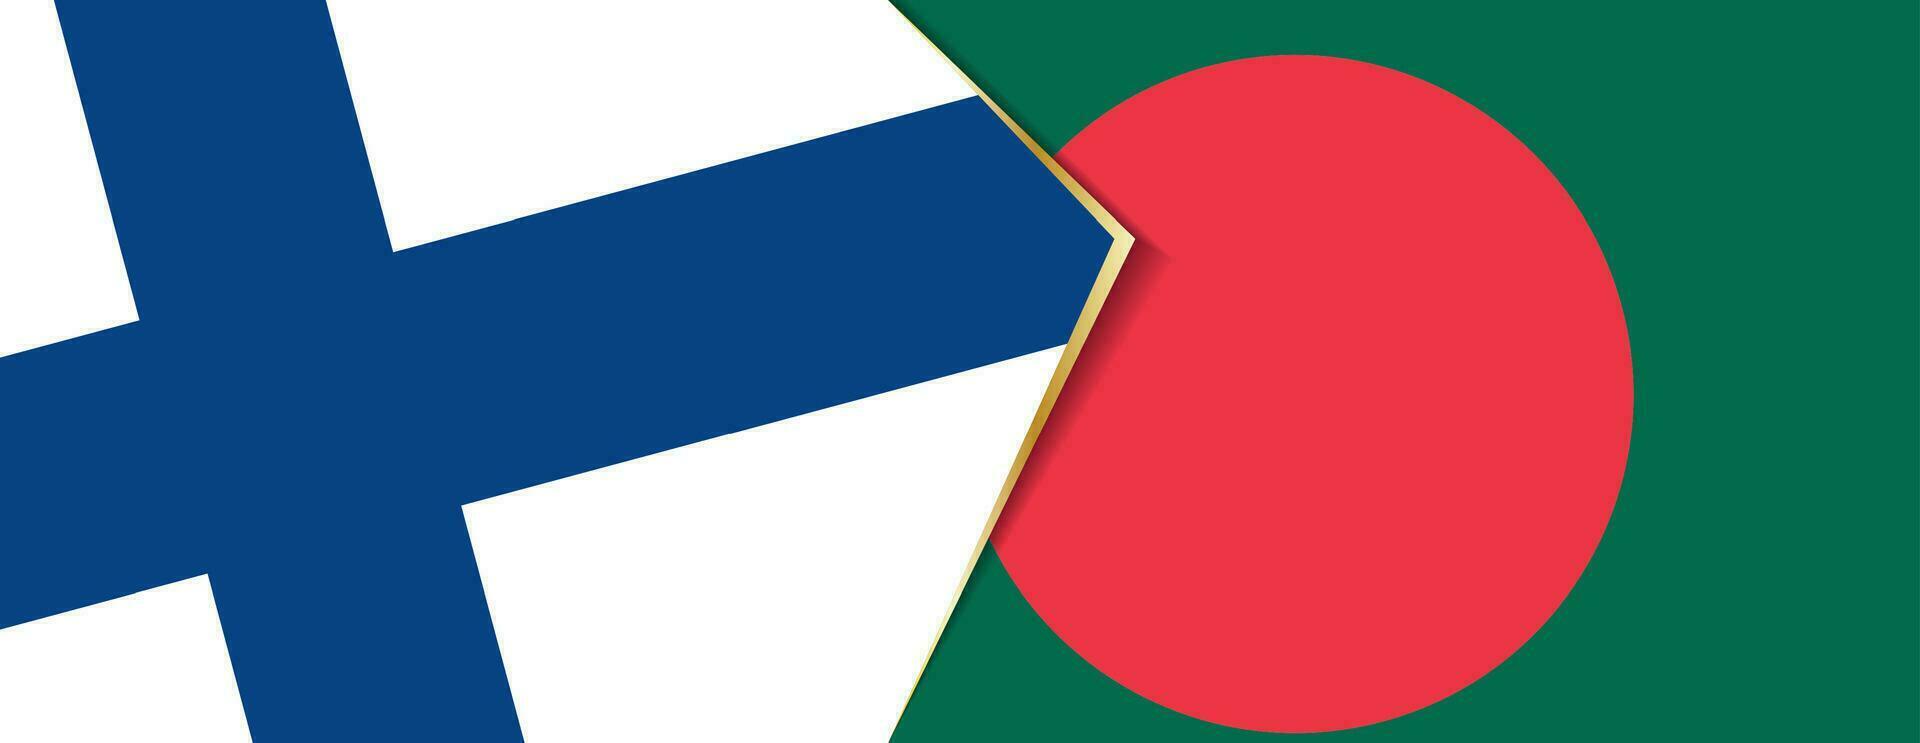 Finland and Bangladesh flags, two vector flags.